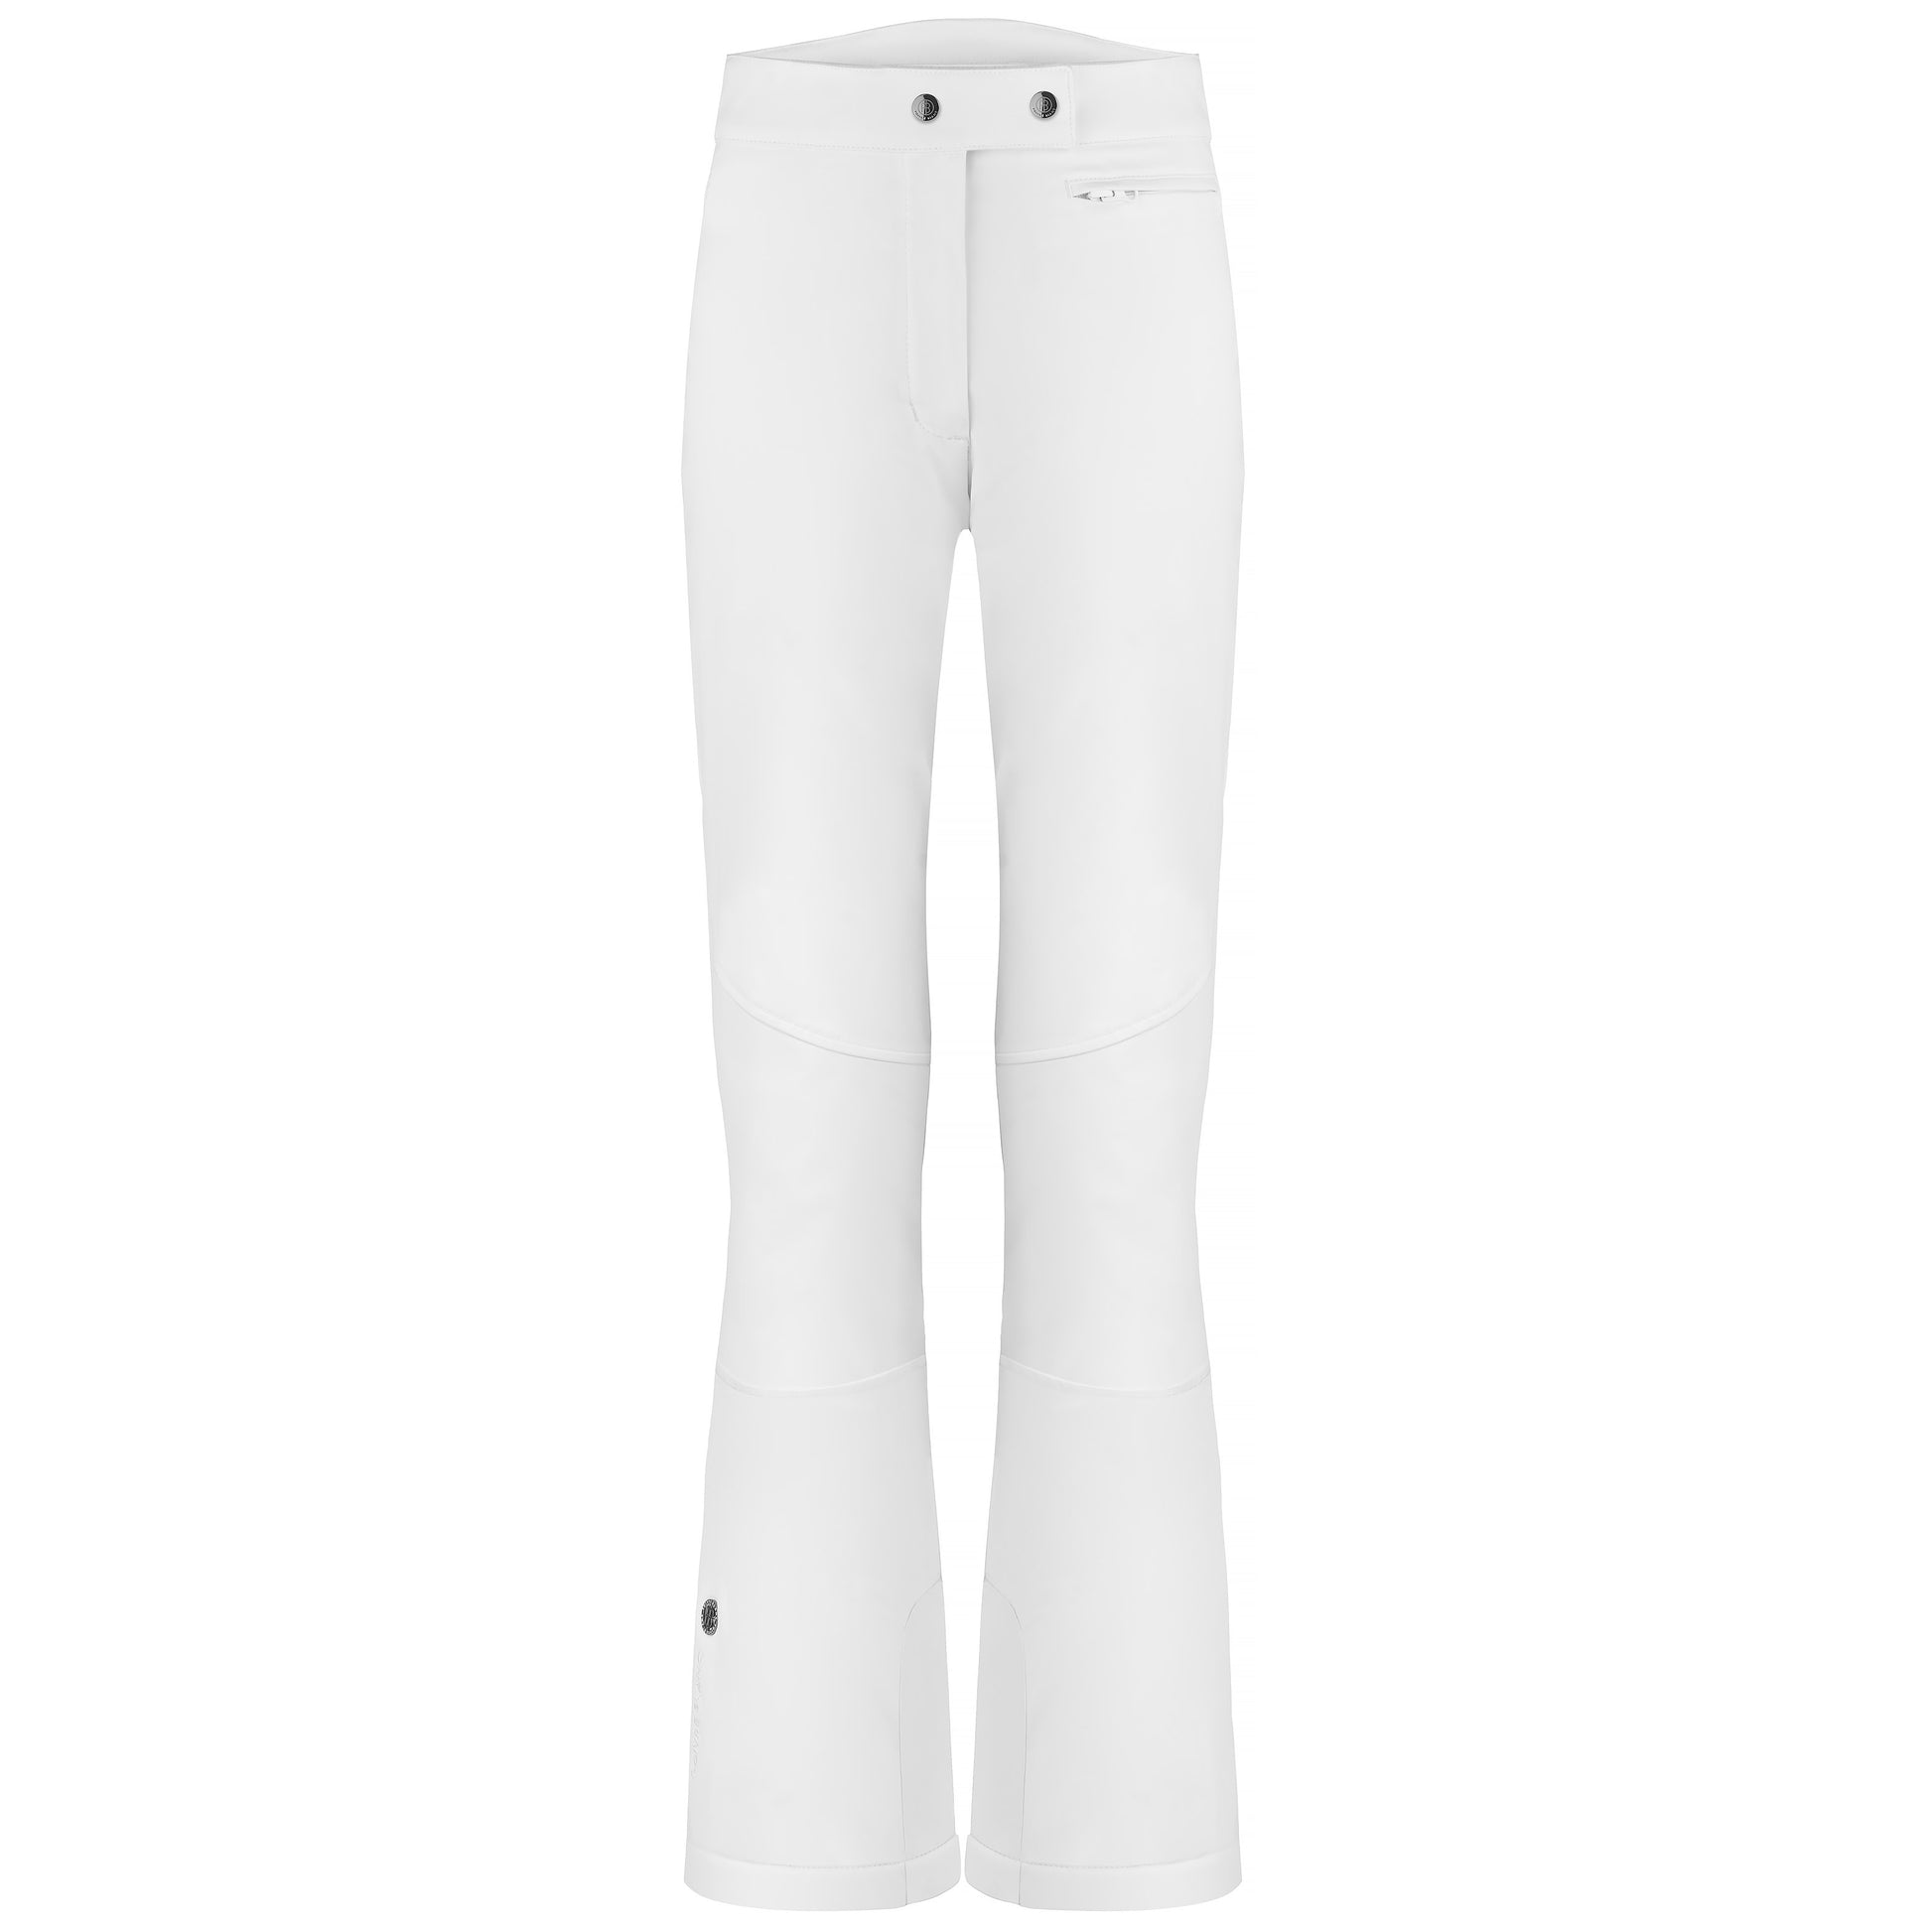 Poivre Blanc Women's Slim Stretch Insulated Pants in White 0821